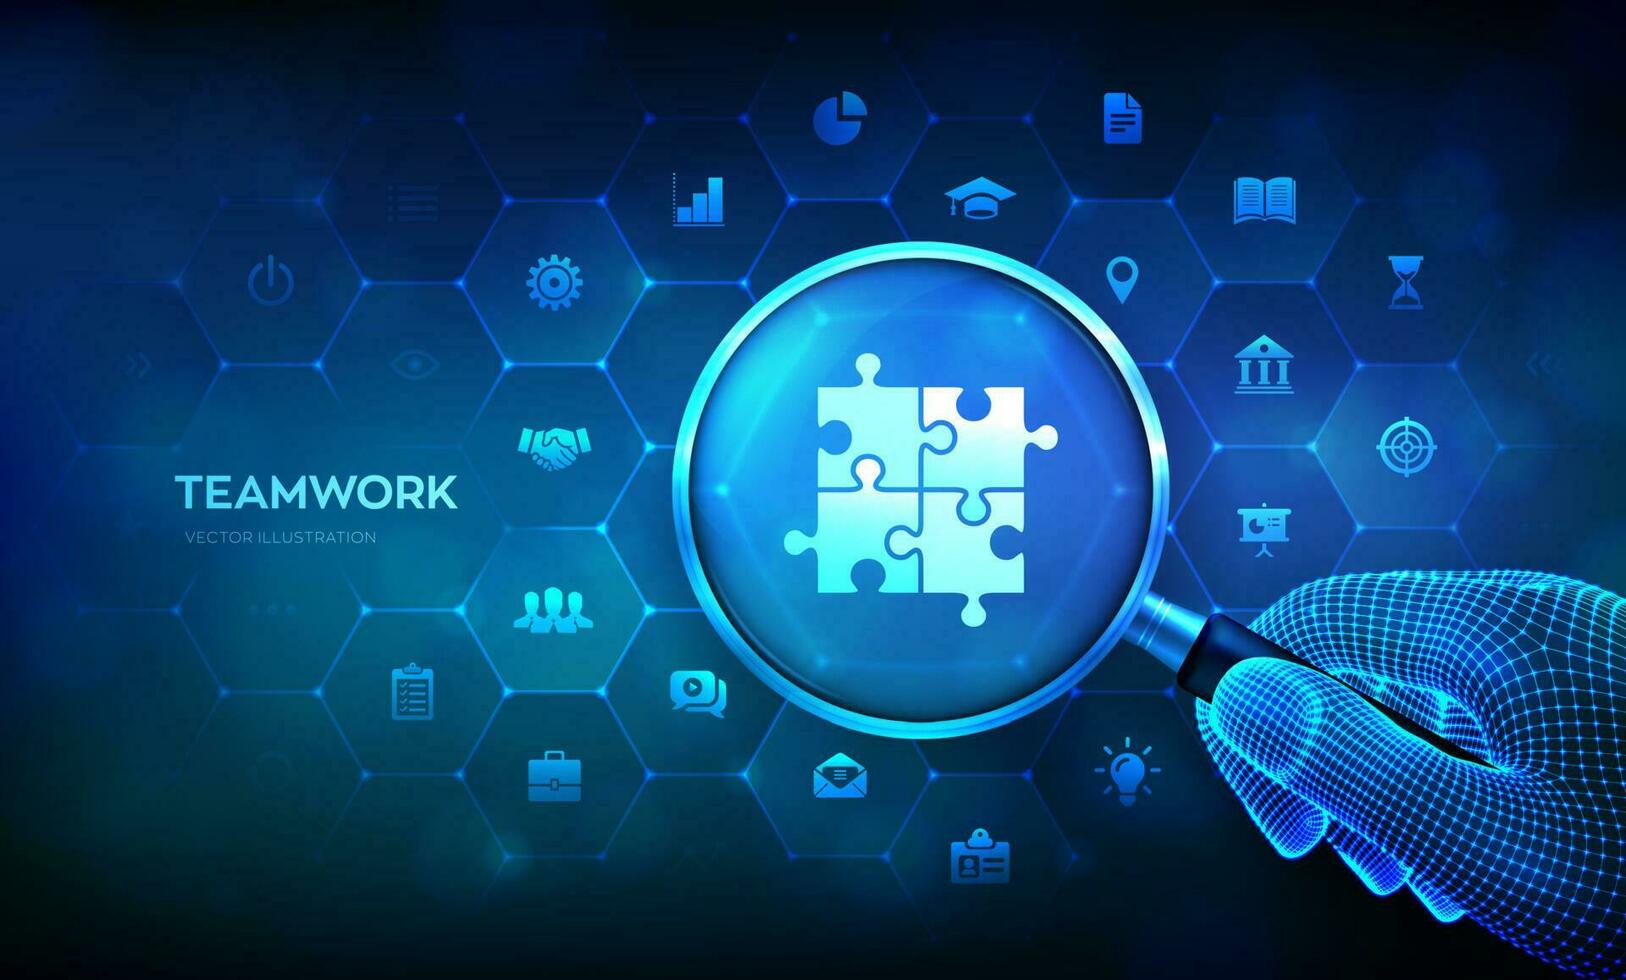 Teamwork. Business Partnership. Puzzle Team elements icon. Global cooperation communication network. Business technology concept with magnifier in wireframe hand and icons. Vector illustration.